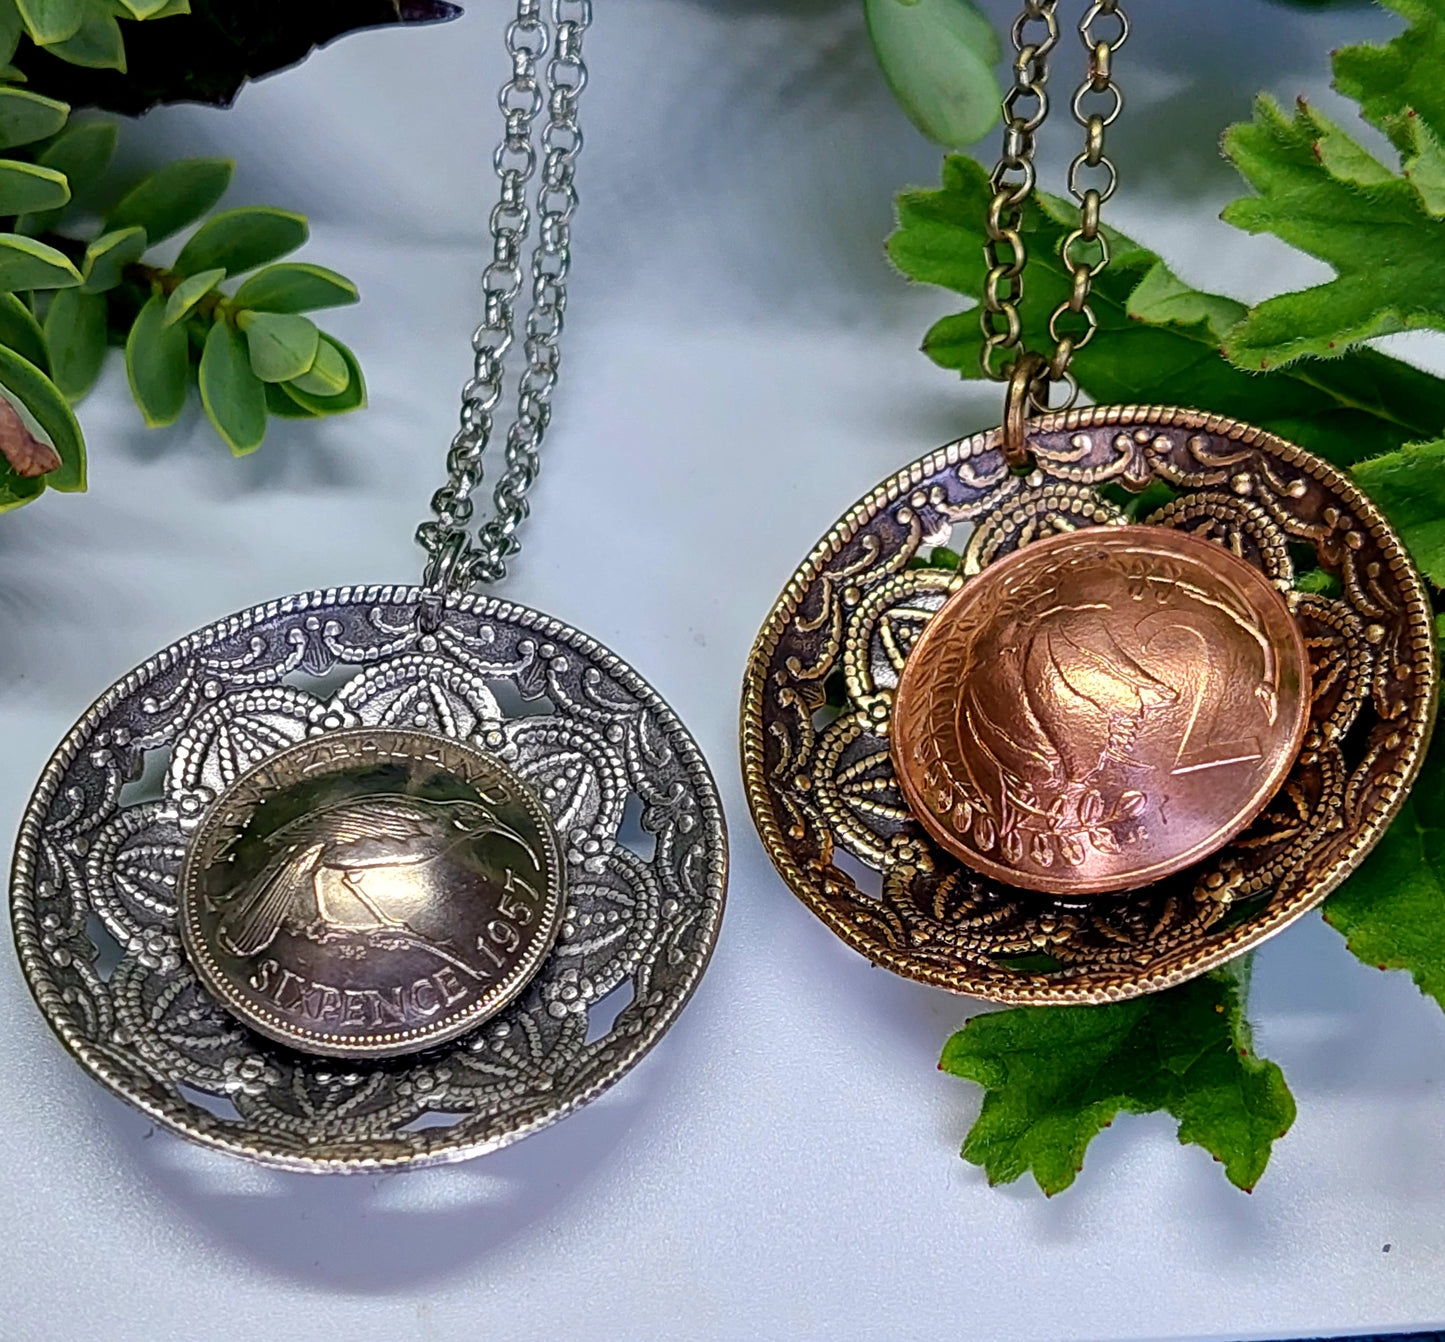 SALE! Re-minted Domed Two Way Garden Circle Pendant with Two Cent Coin - 40% off!